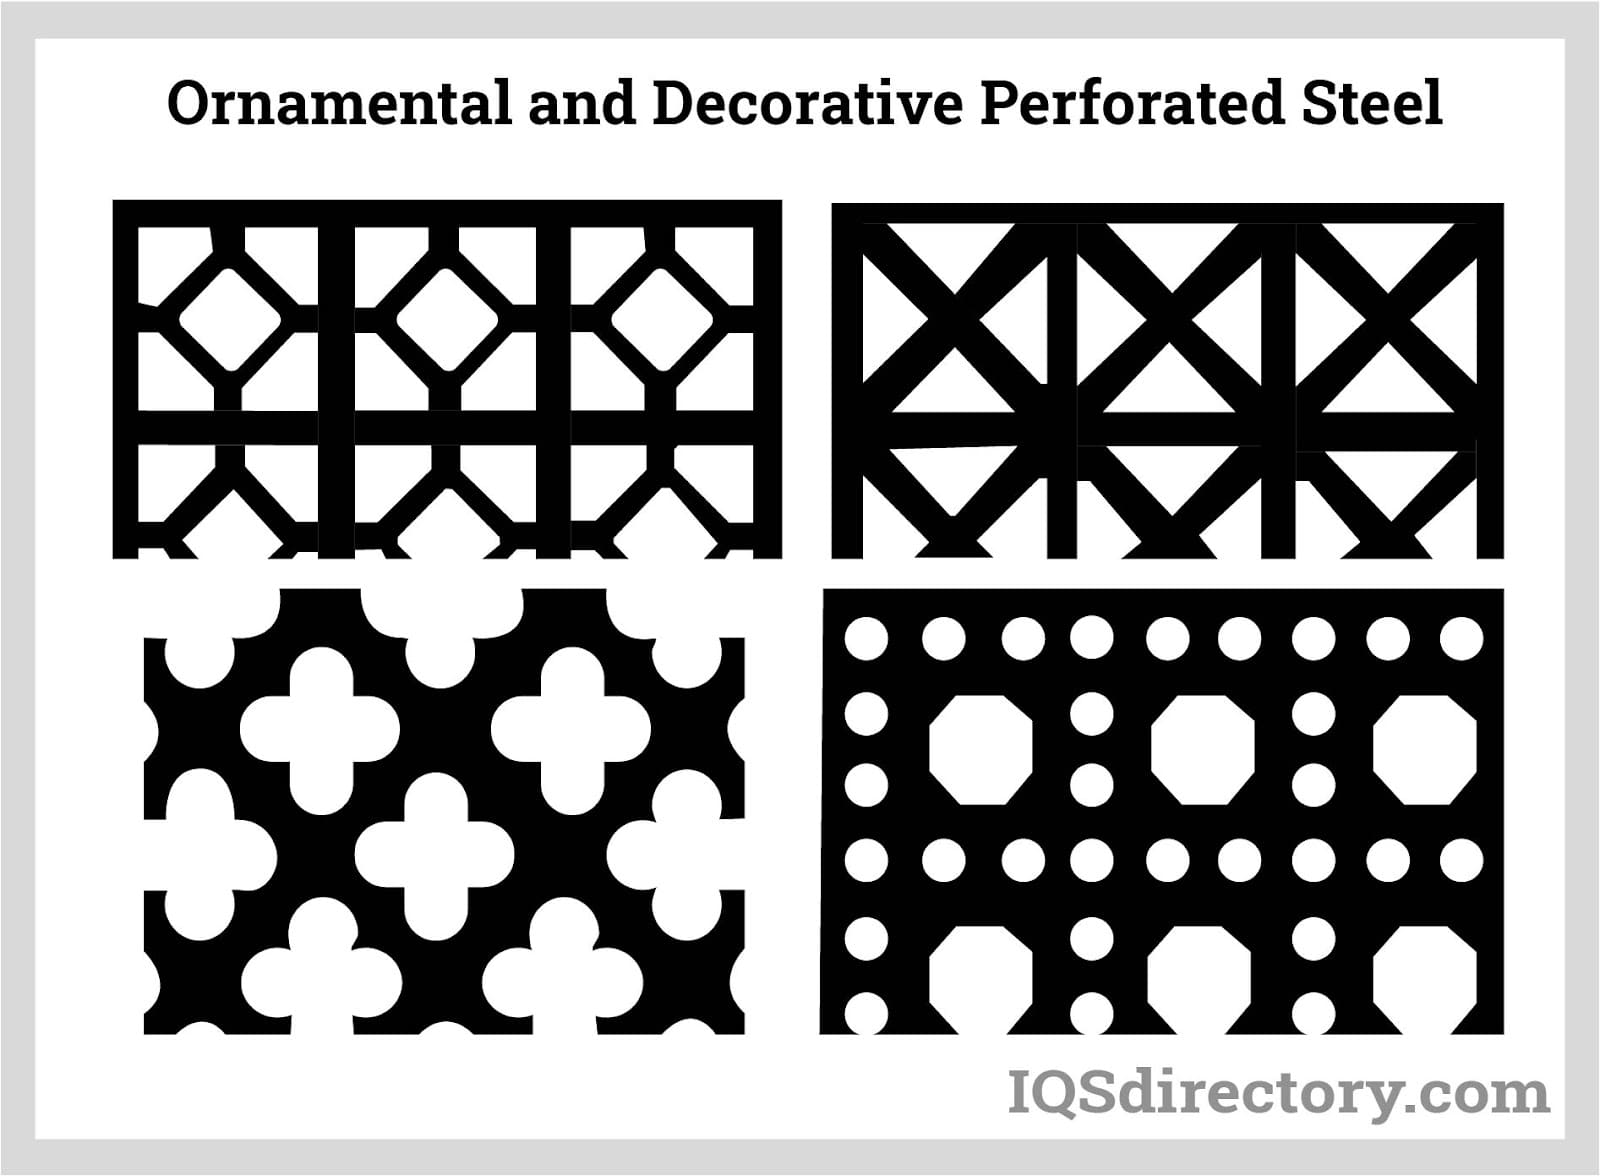 Ornamental and Decorative Perforated Steel